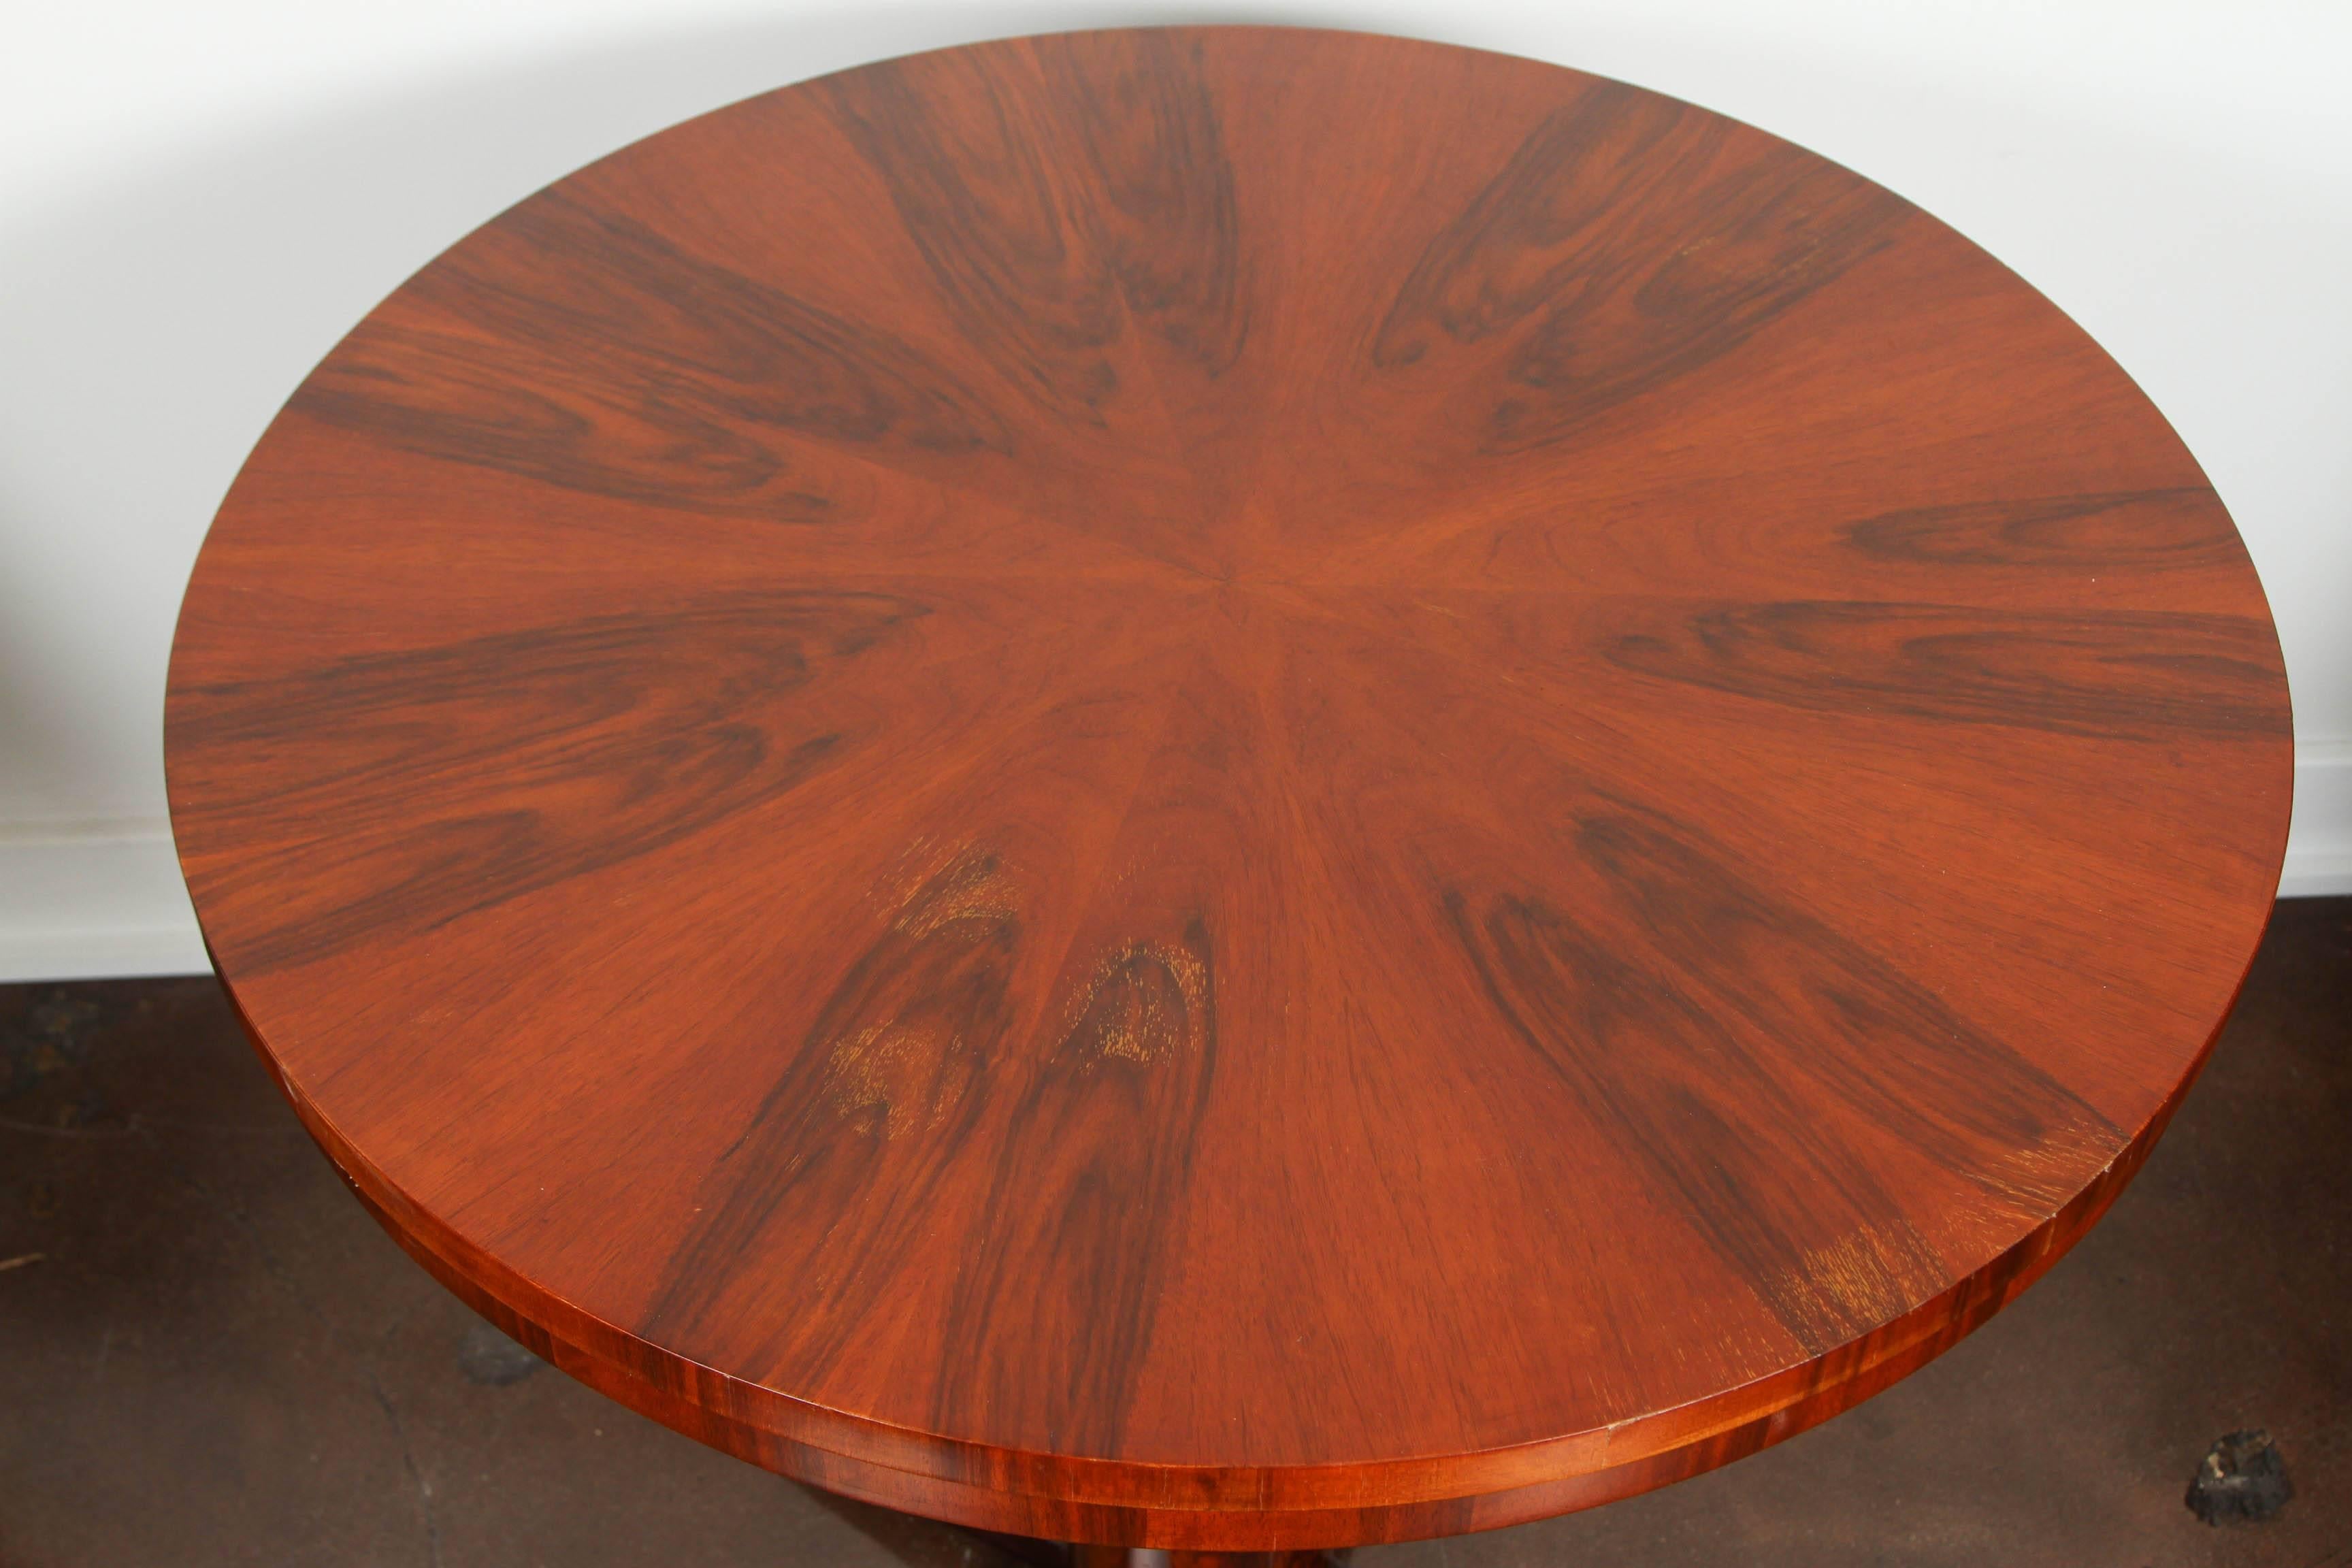 Vintage occasional table made of flamed mahogany, circa 1930s. Good original condition.